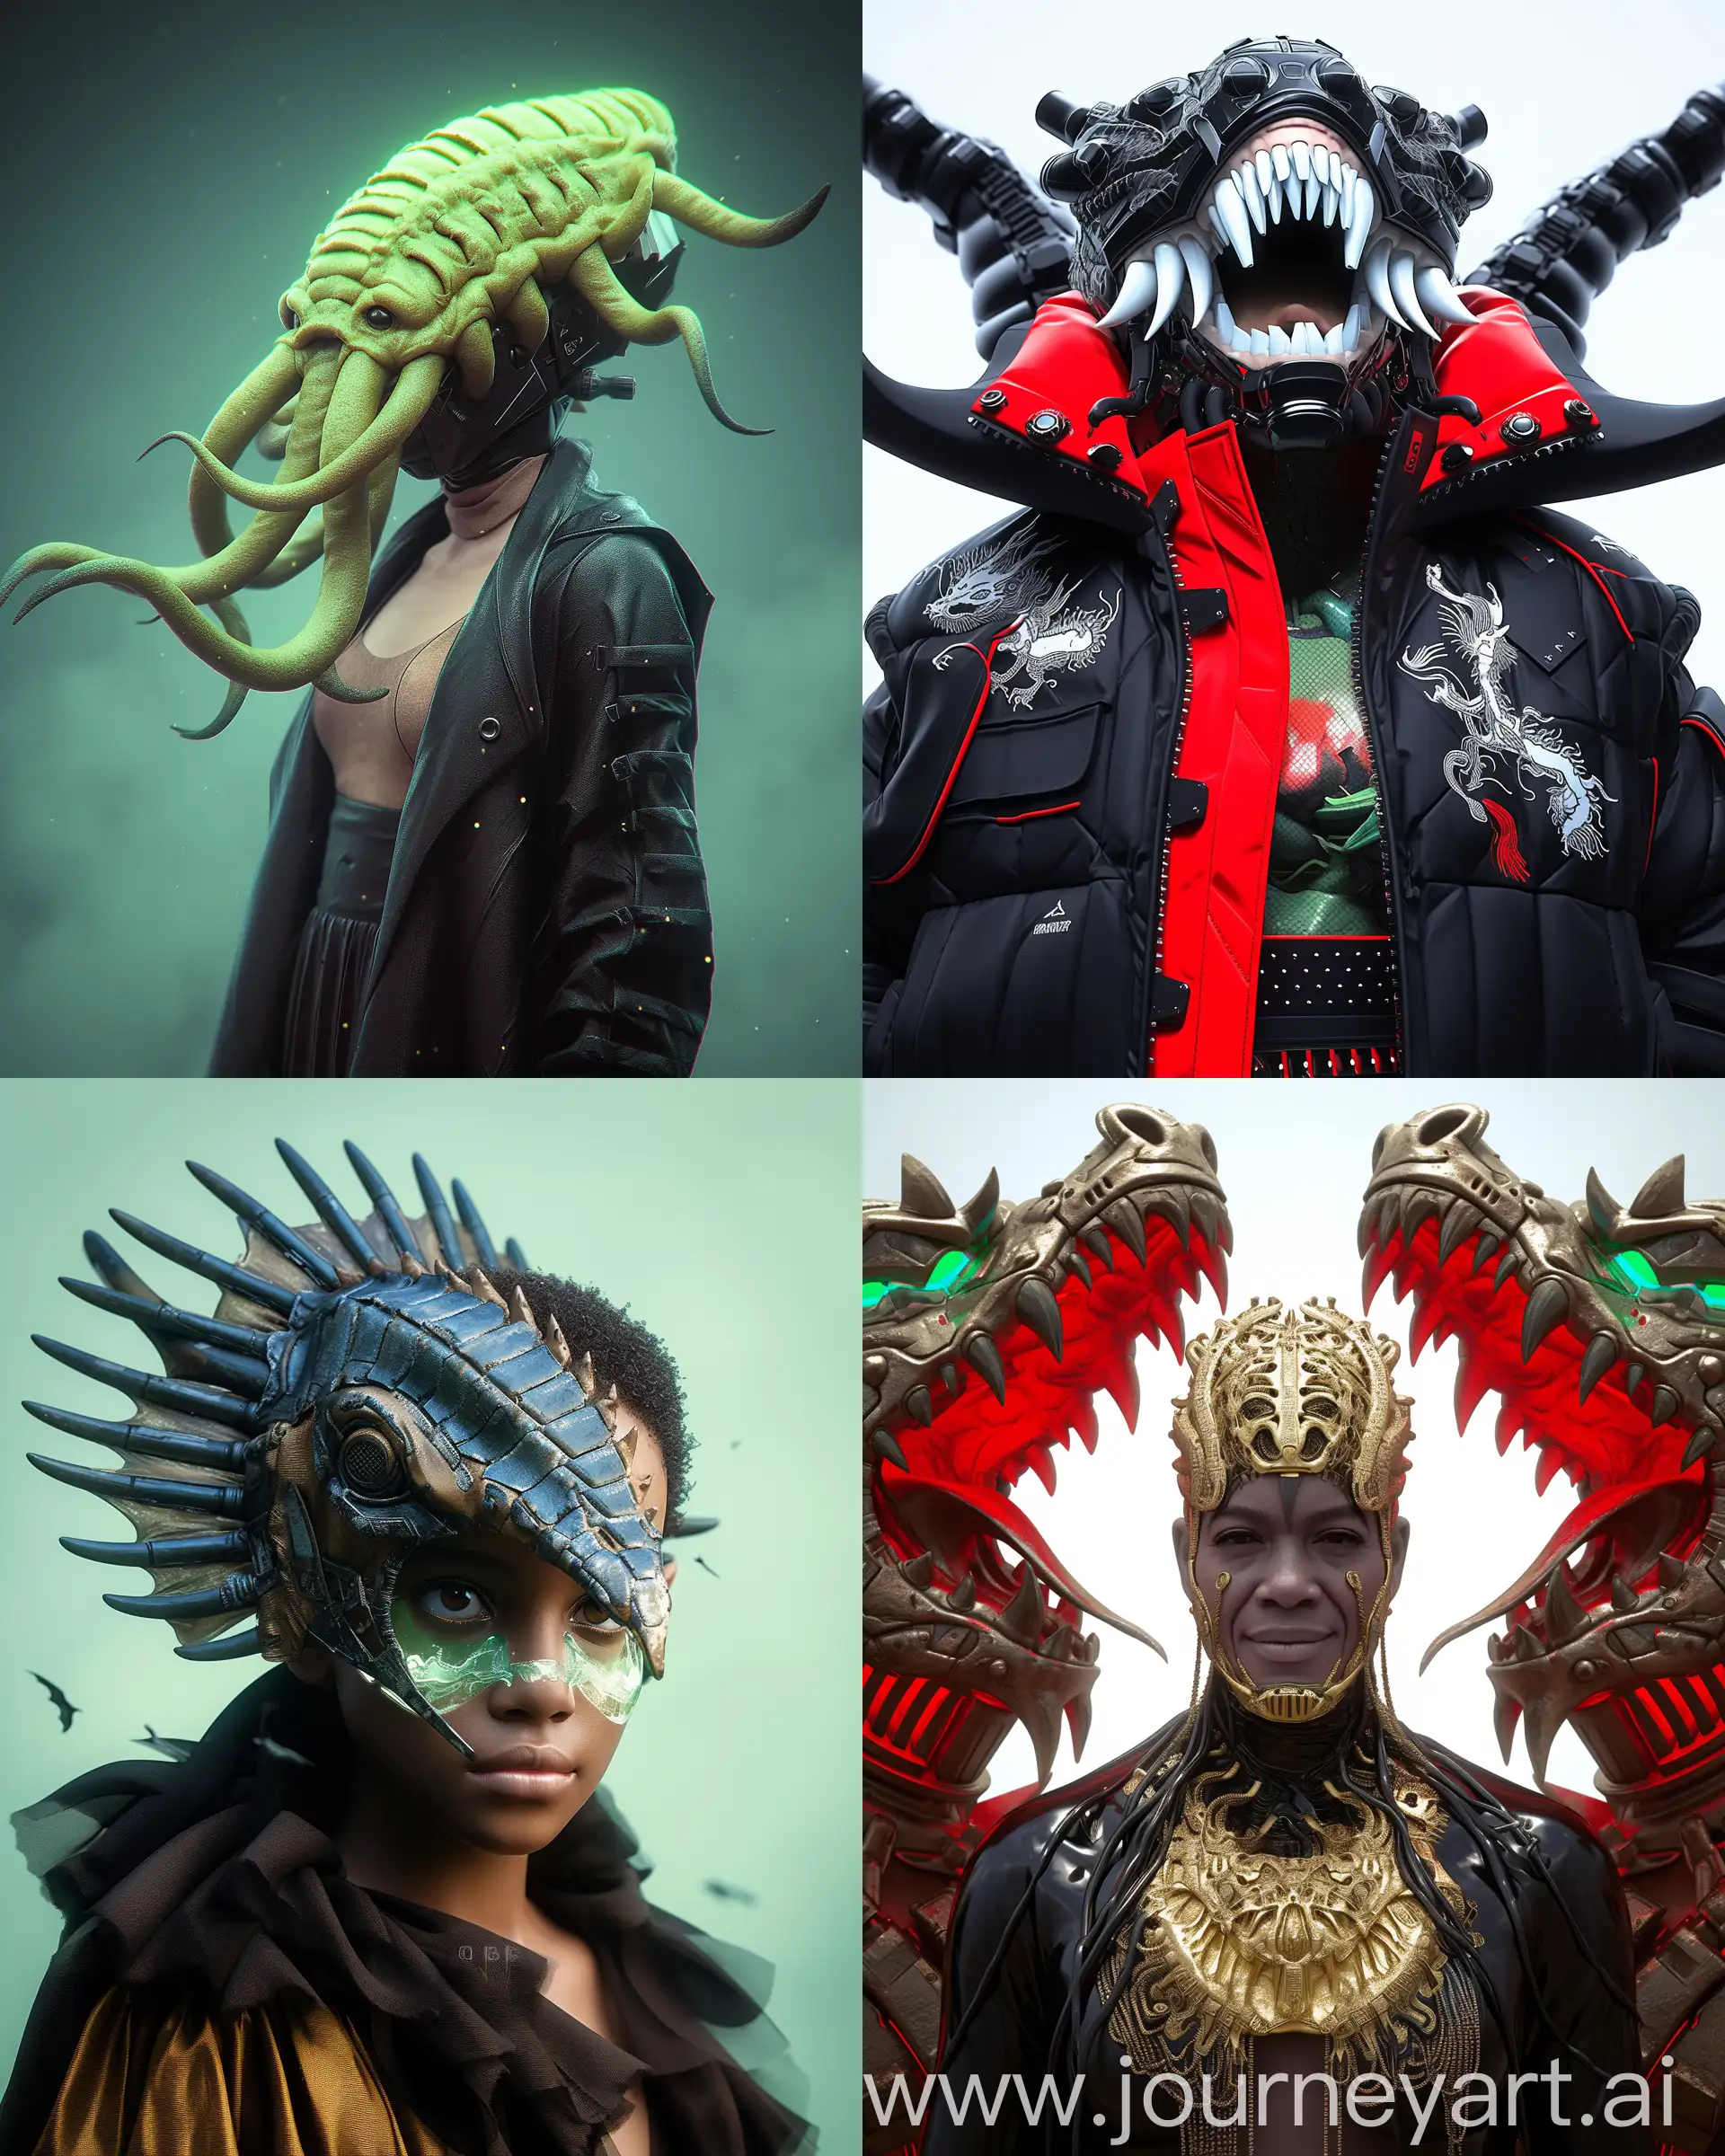 https://s.mj.run/xWBwbbV9-rw https://s.mj.run/JRlA5BBVDrc hyper-realistic fashion editorial photography, a close up of a person wearing a costume, cyberpunk art, inspired by Zoltan Boros, zbrush central contest winner, afrofuturism, dragon helmet, cthulhu samurai, rendered in keyshot, techwear fashion, symmetrical dieselpunk warrior, hg giger, liquid headdress, future techwear, cyber mech, techwear occultist, extreme detail, hyper-realistic, photorealistic, professional photography, photos taken with HASSELBLAD H6D, 50mm, iso 800, professional lighting, photorealism, perfect focus, National Geographic photo of the year, photograph by Tim Walker, studio photography --ar 4:5 --niji 6 --c 10